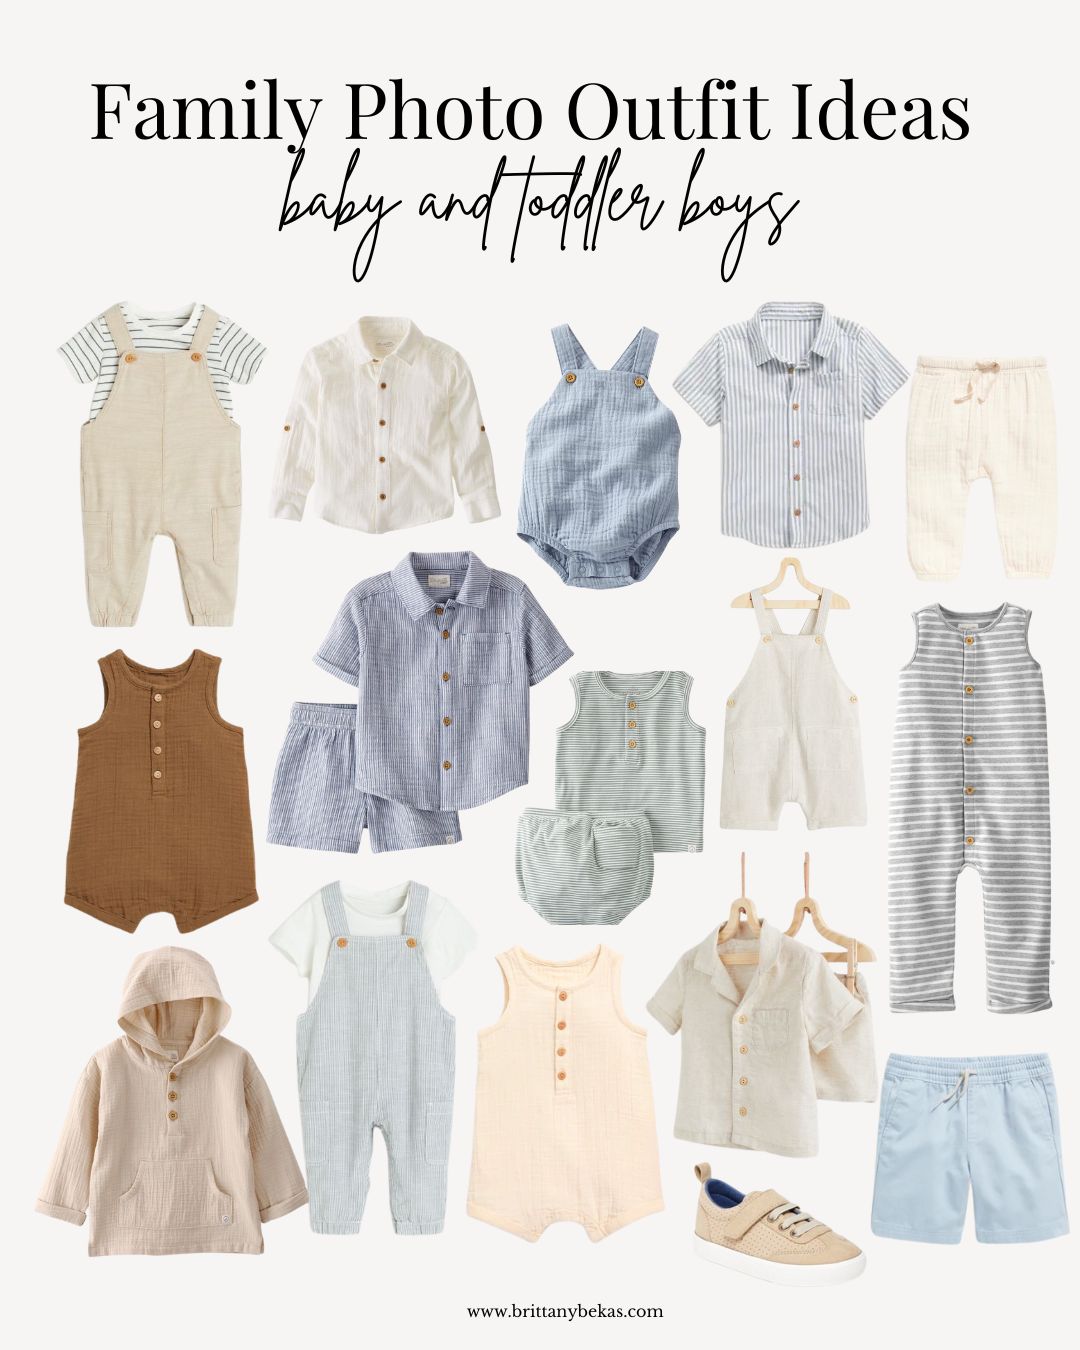 Baby + Toddler Outfit Ideas